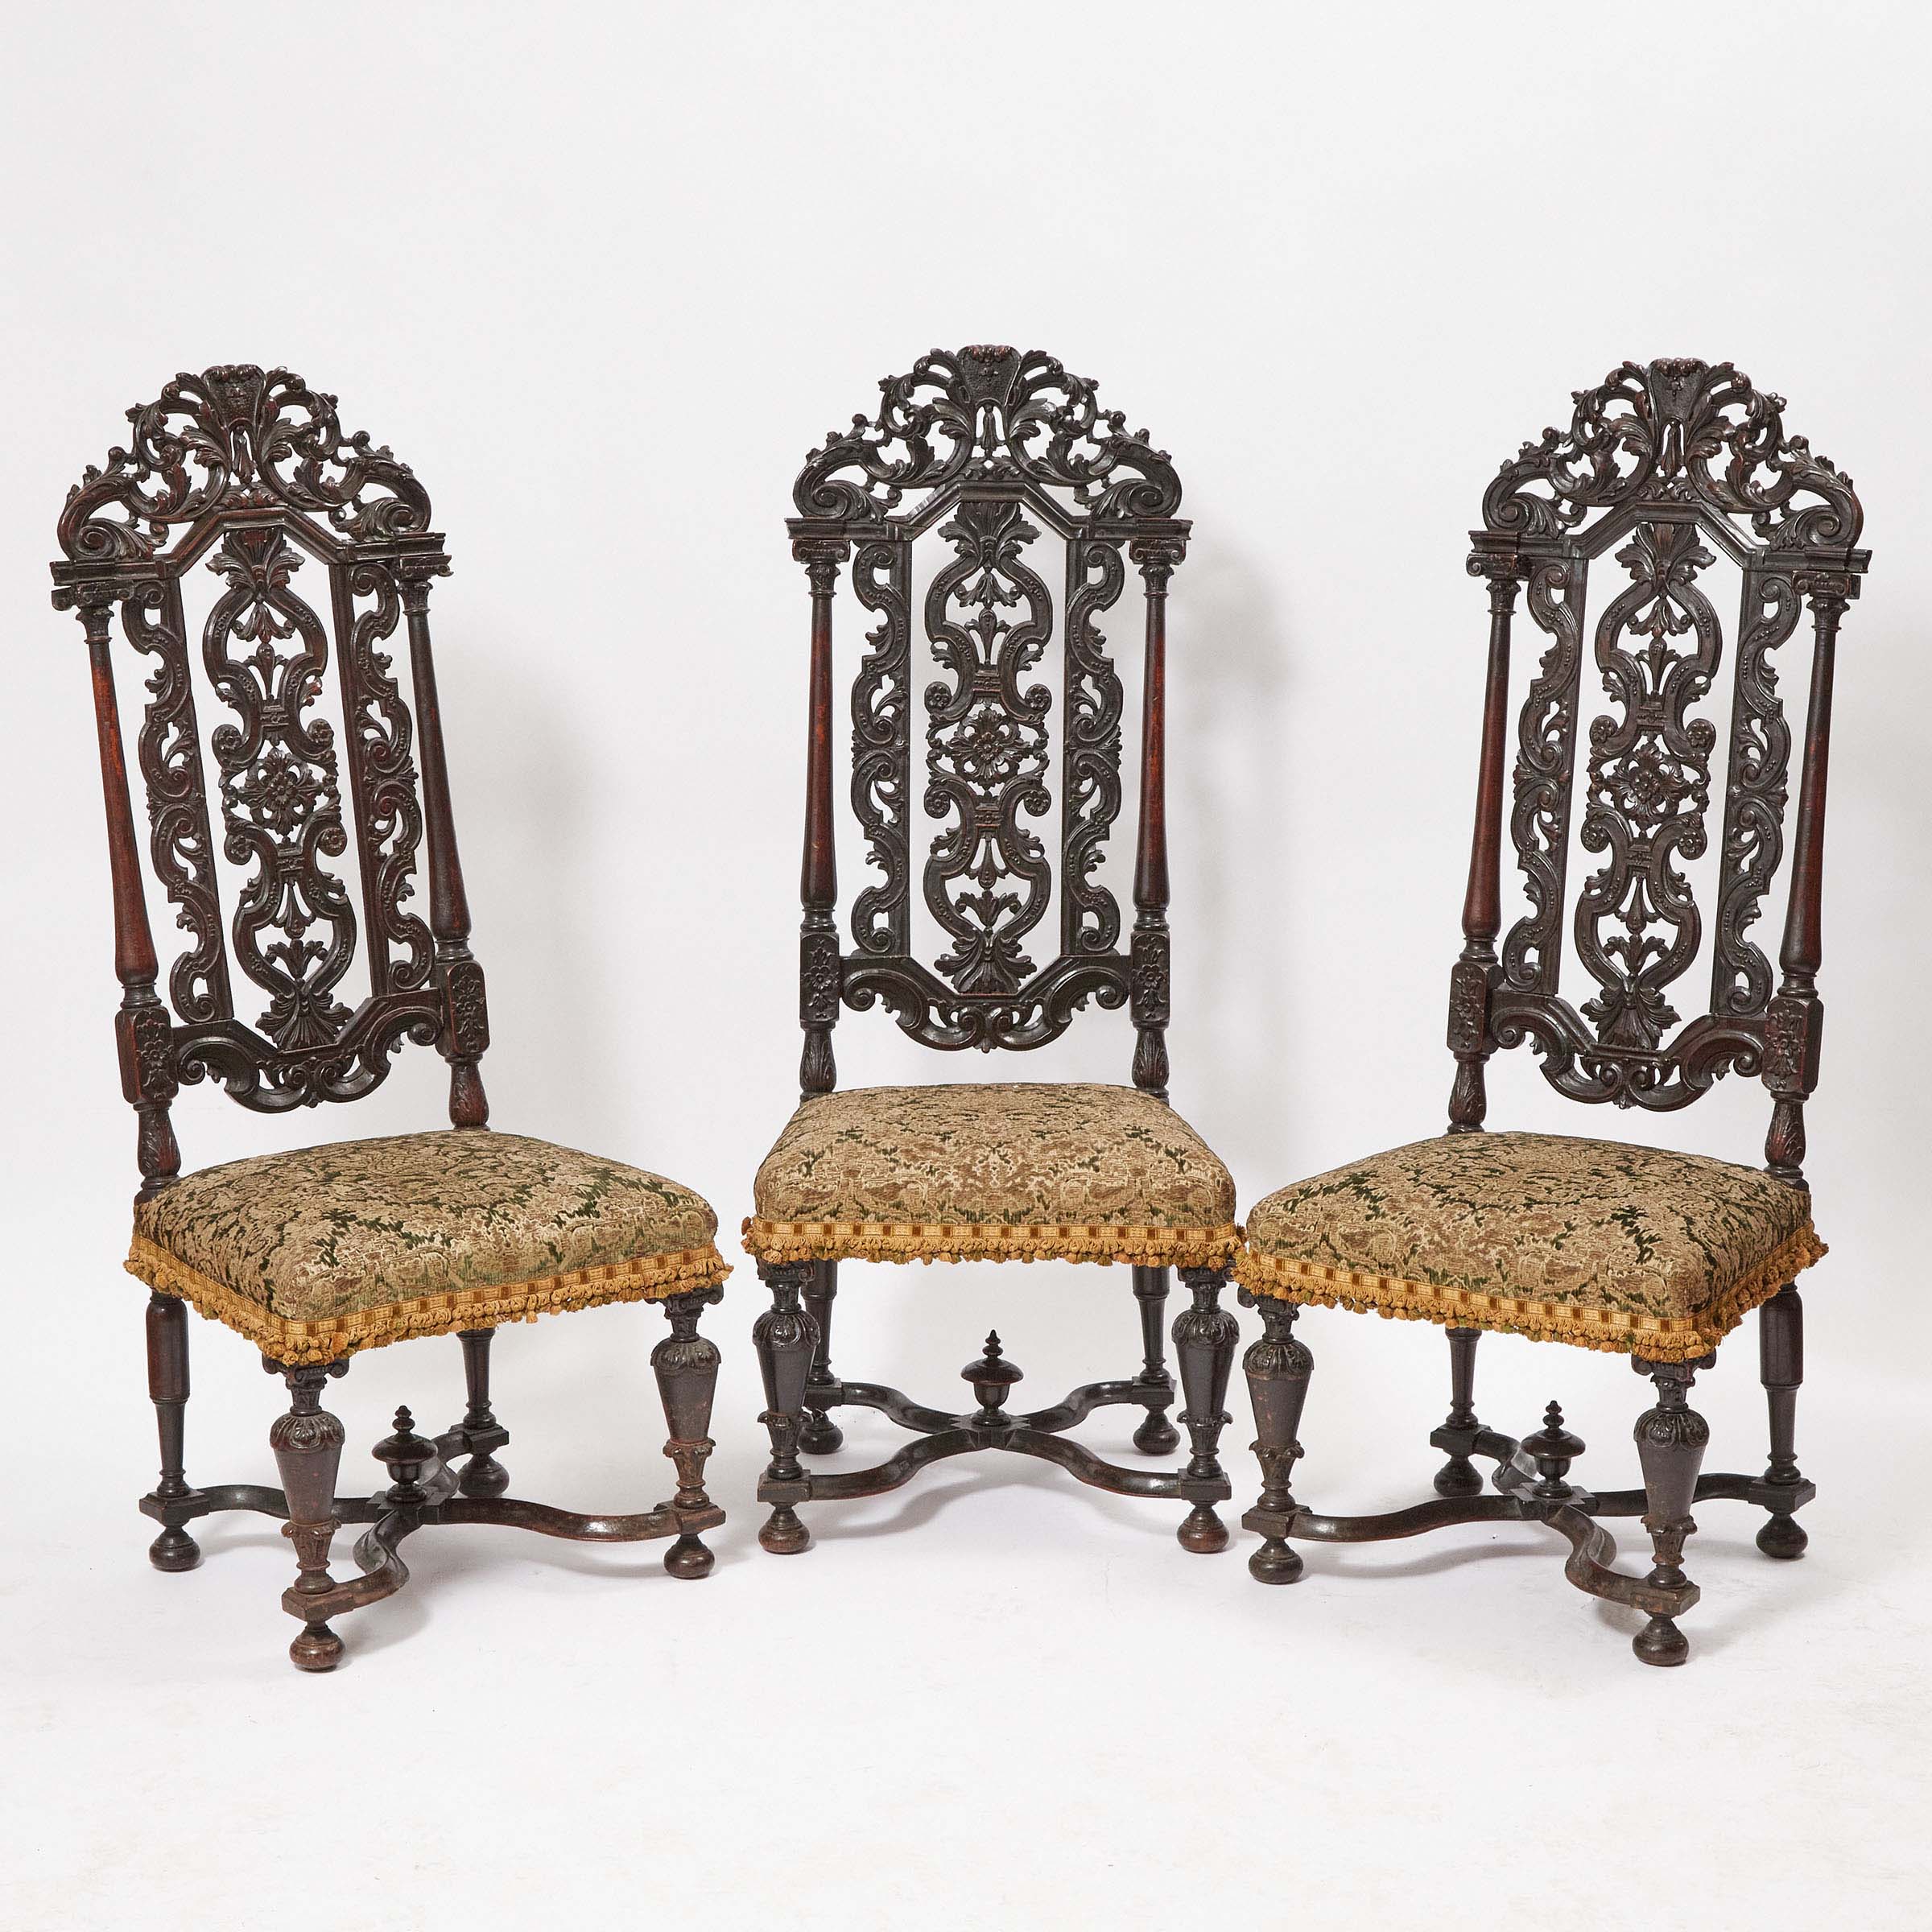 Set of Three William and Mary Period